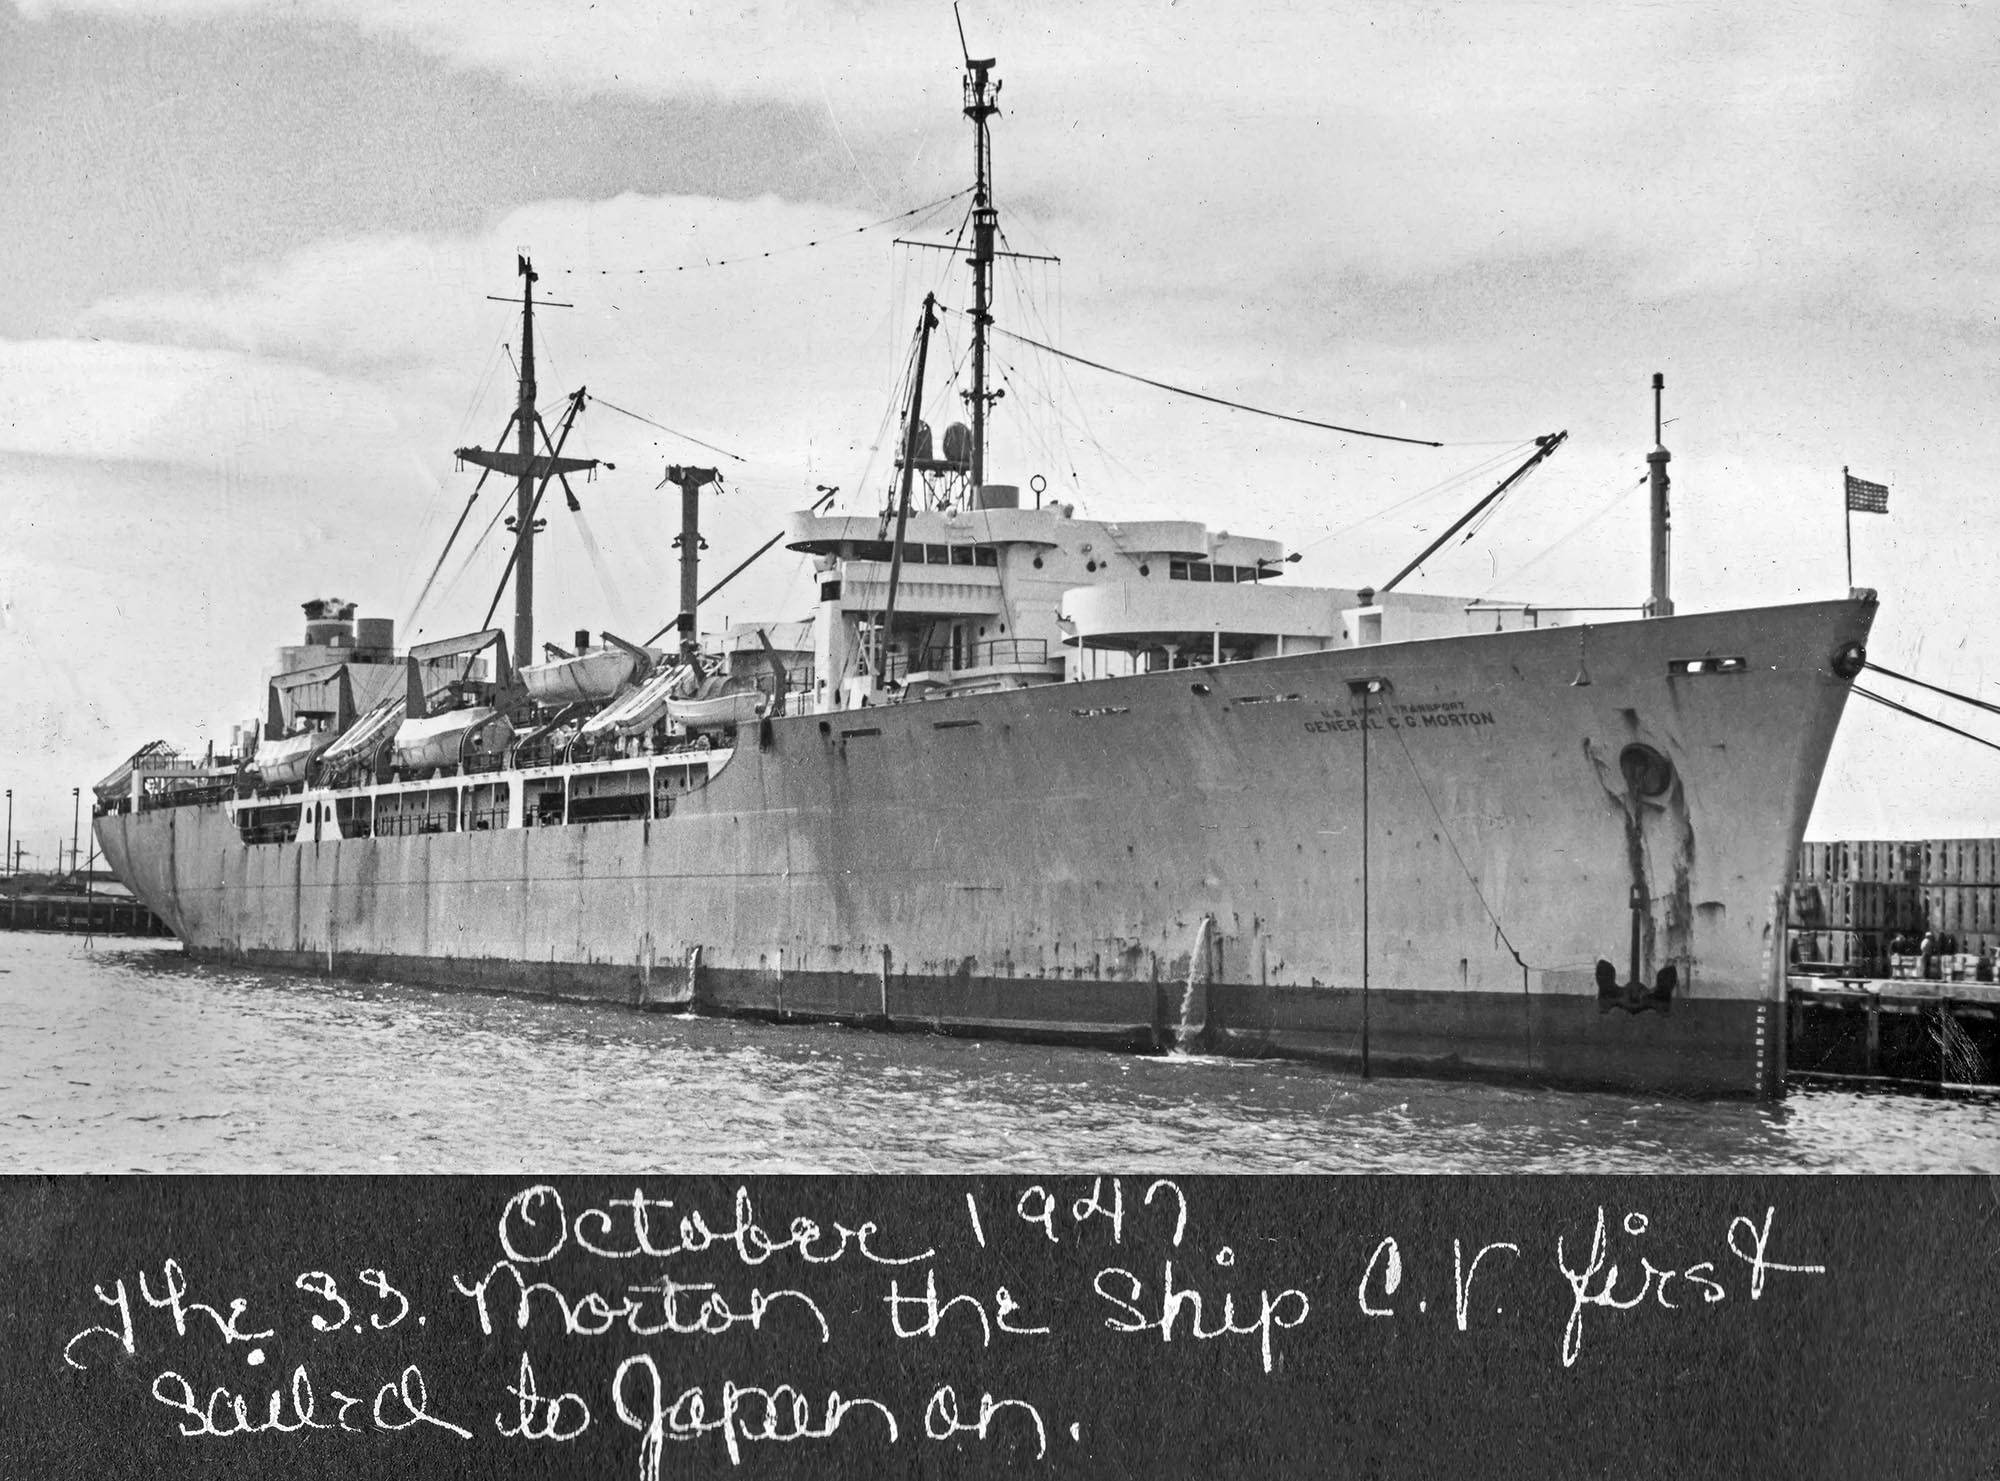 USS Morton (DD-948) a Forrest Sherman-class destroyer of the United States Navy. This is the ship Clarence V. Ward first sailed on to Japan.

Ward was sent with the US Army to provide ophthalmology care to war-refugee Japanese children and adults as well as American Service personnel.

From a photo album titled "Pictures from Japan and Elsewhere." Occupied Japan era, Captain Clarence V. Ward, US Army from 1947-1949, 28th General Hospital, Osaka, Japan. Clarence lived in Peoria, Illinois (Feb. 13, 1922 - June 5, 2009).

Ward served in the US Army from 1947-1949, 28th General Hospital, Osaka, Japan attaining the rank of Captain. He graduated from St. Bernard's Grade School in 1936; Spalding Institute in 1940; University of Notre Dame in 1944 where he earned his BS; and University of St. Louis School of Medicine in 1946. He served his internship at St. John's Hospital in St. Louis, MO from 1946-1947; Post Graduate at Northwestern University in Ophthalmology from 1949-1950; Residency at Hines Veterans Hospital in Hines, IL from 1950-1952 in Ophthalmology. He was an Ophthalmologist full time from 1952-1995 and part time from 1996-2004.